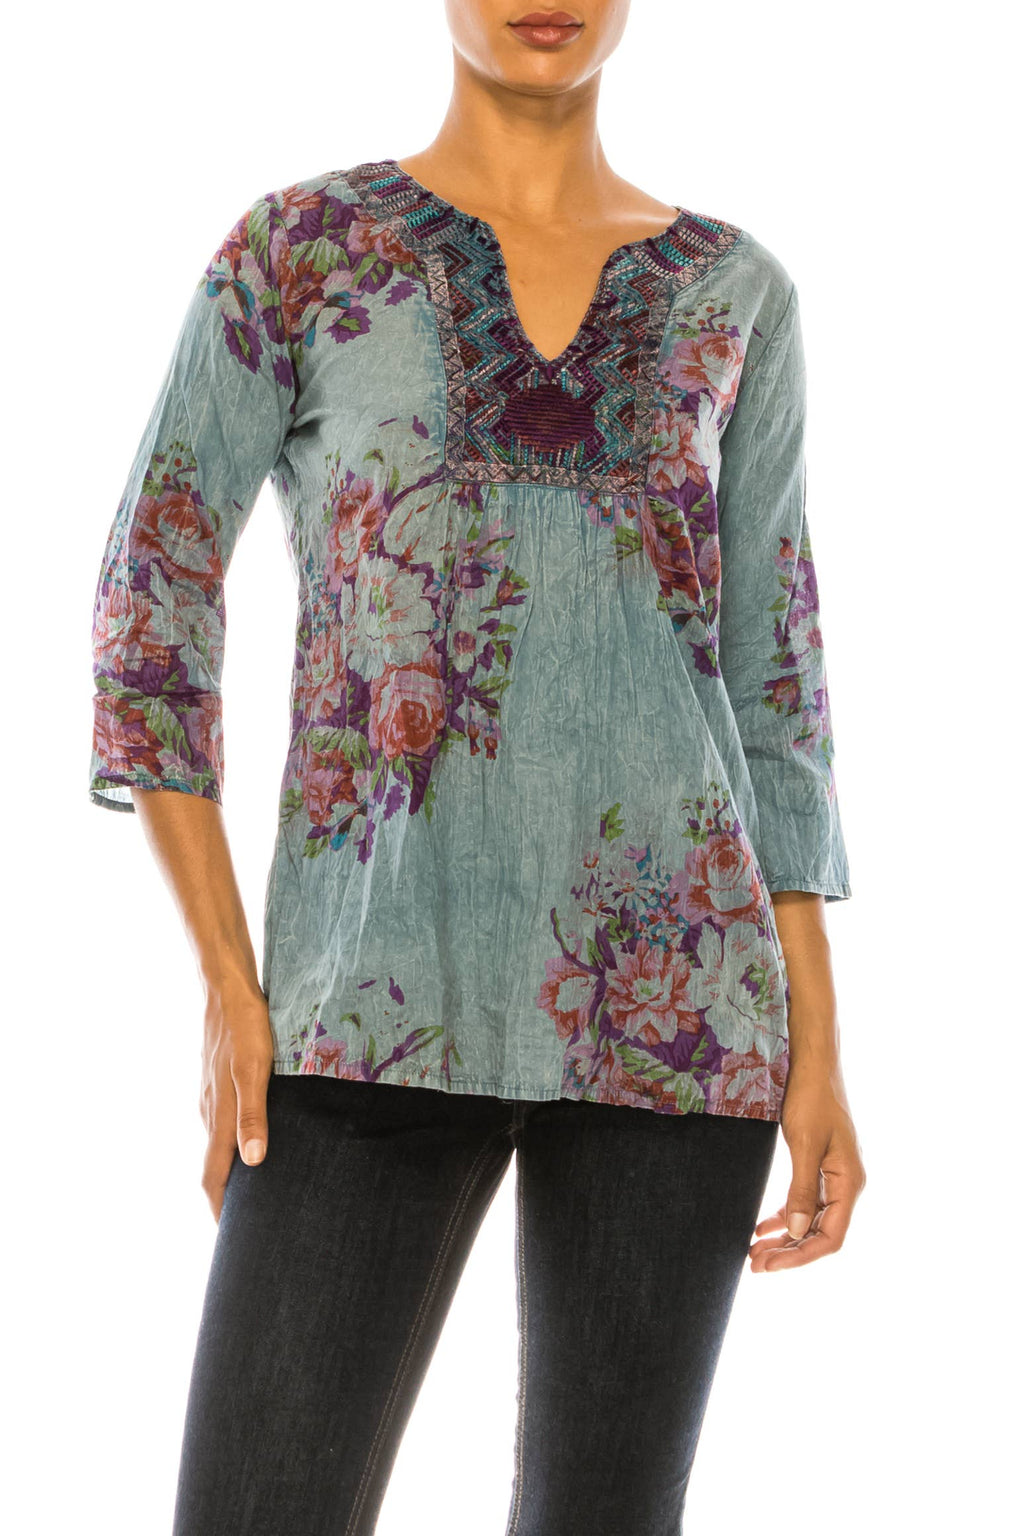 Vintage Gray Floral Tunic with Embroidery